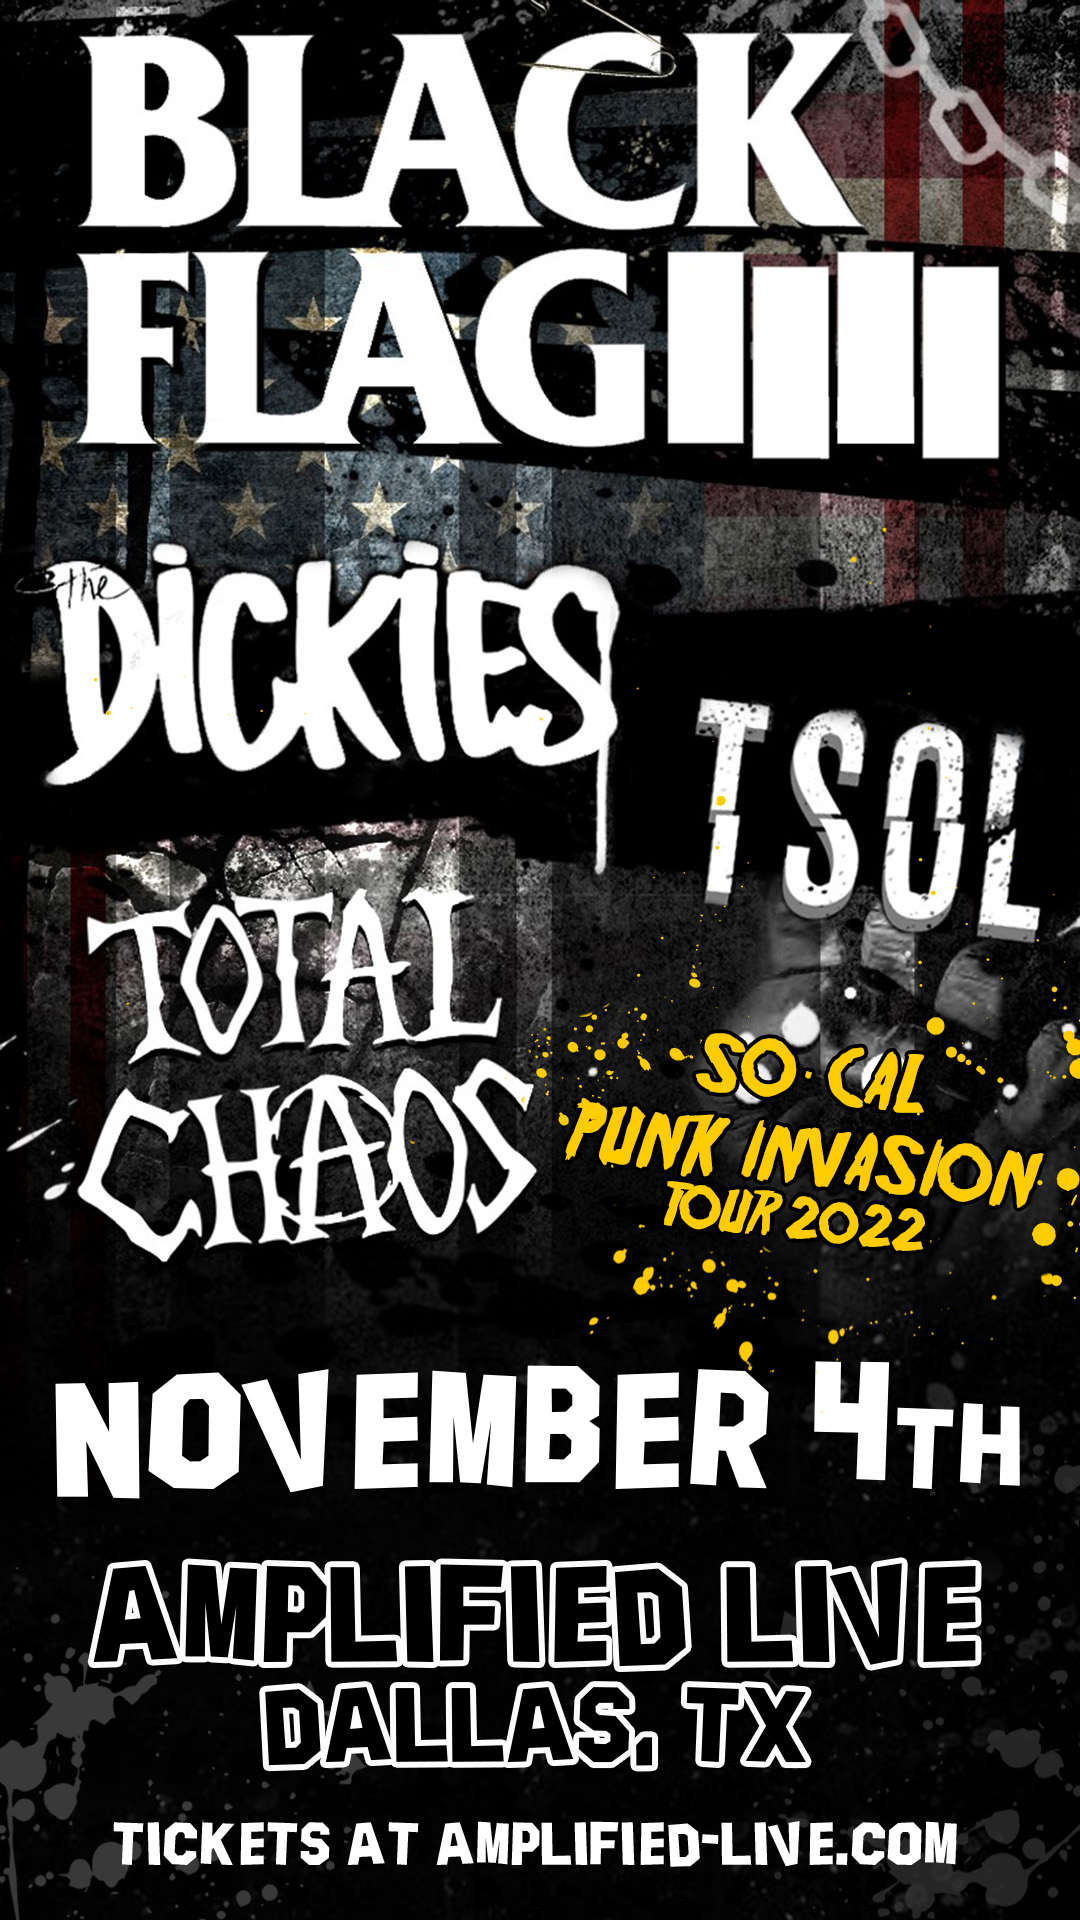 So Cal Punk Invasion Tour with Black Flag + more!